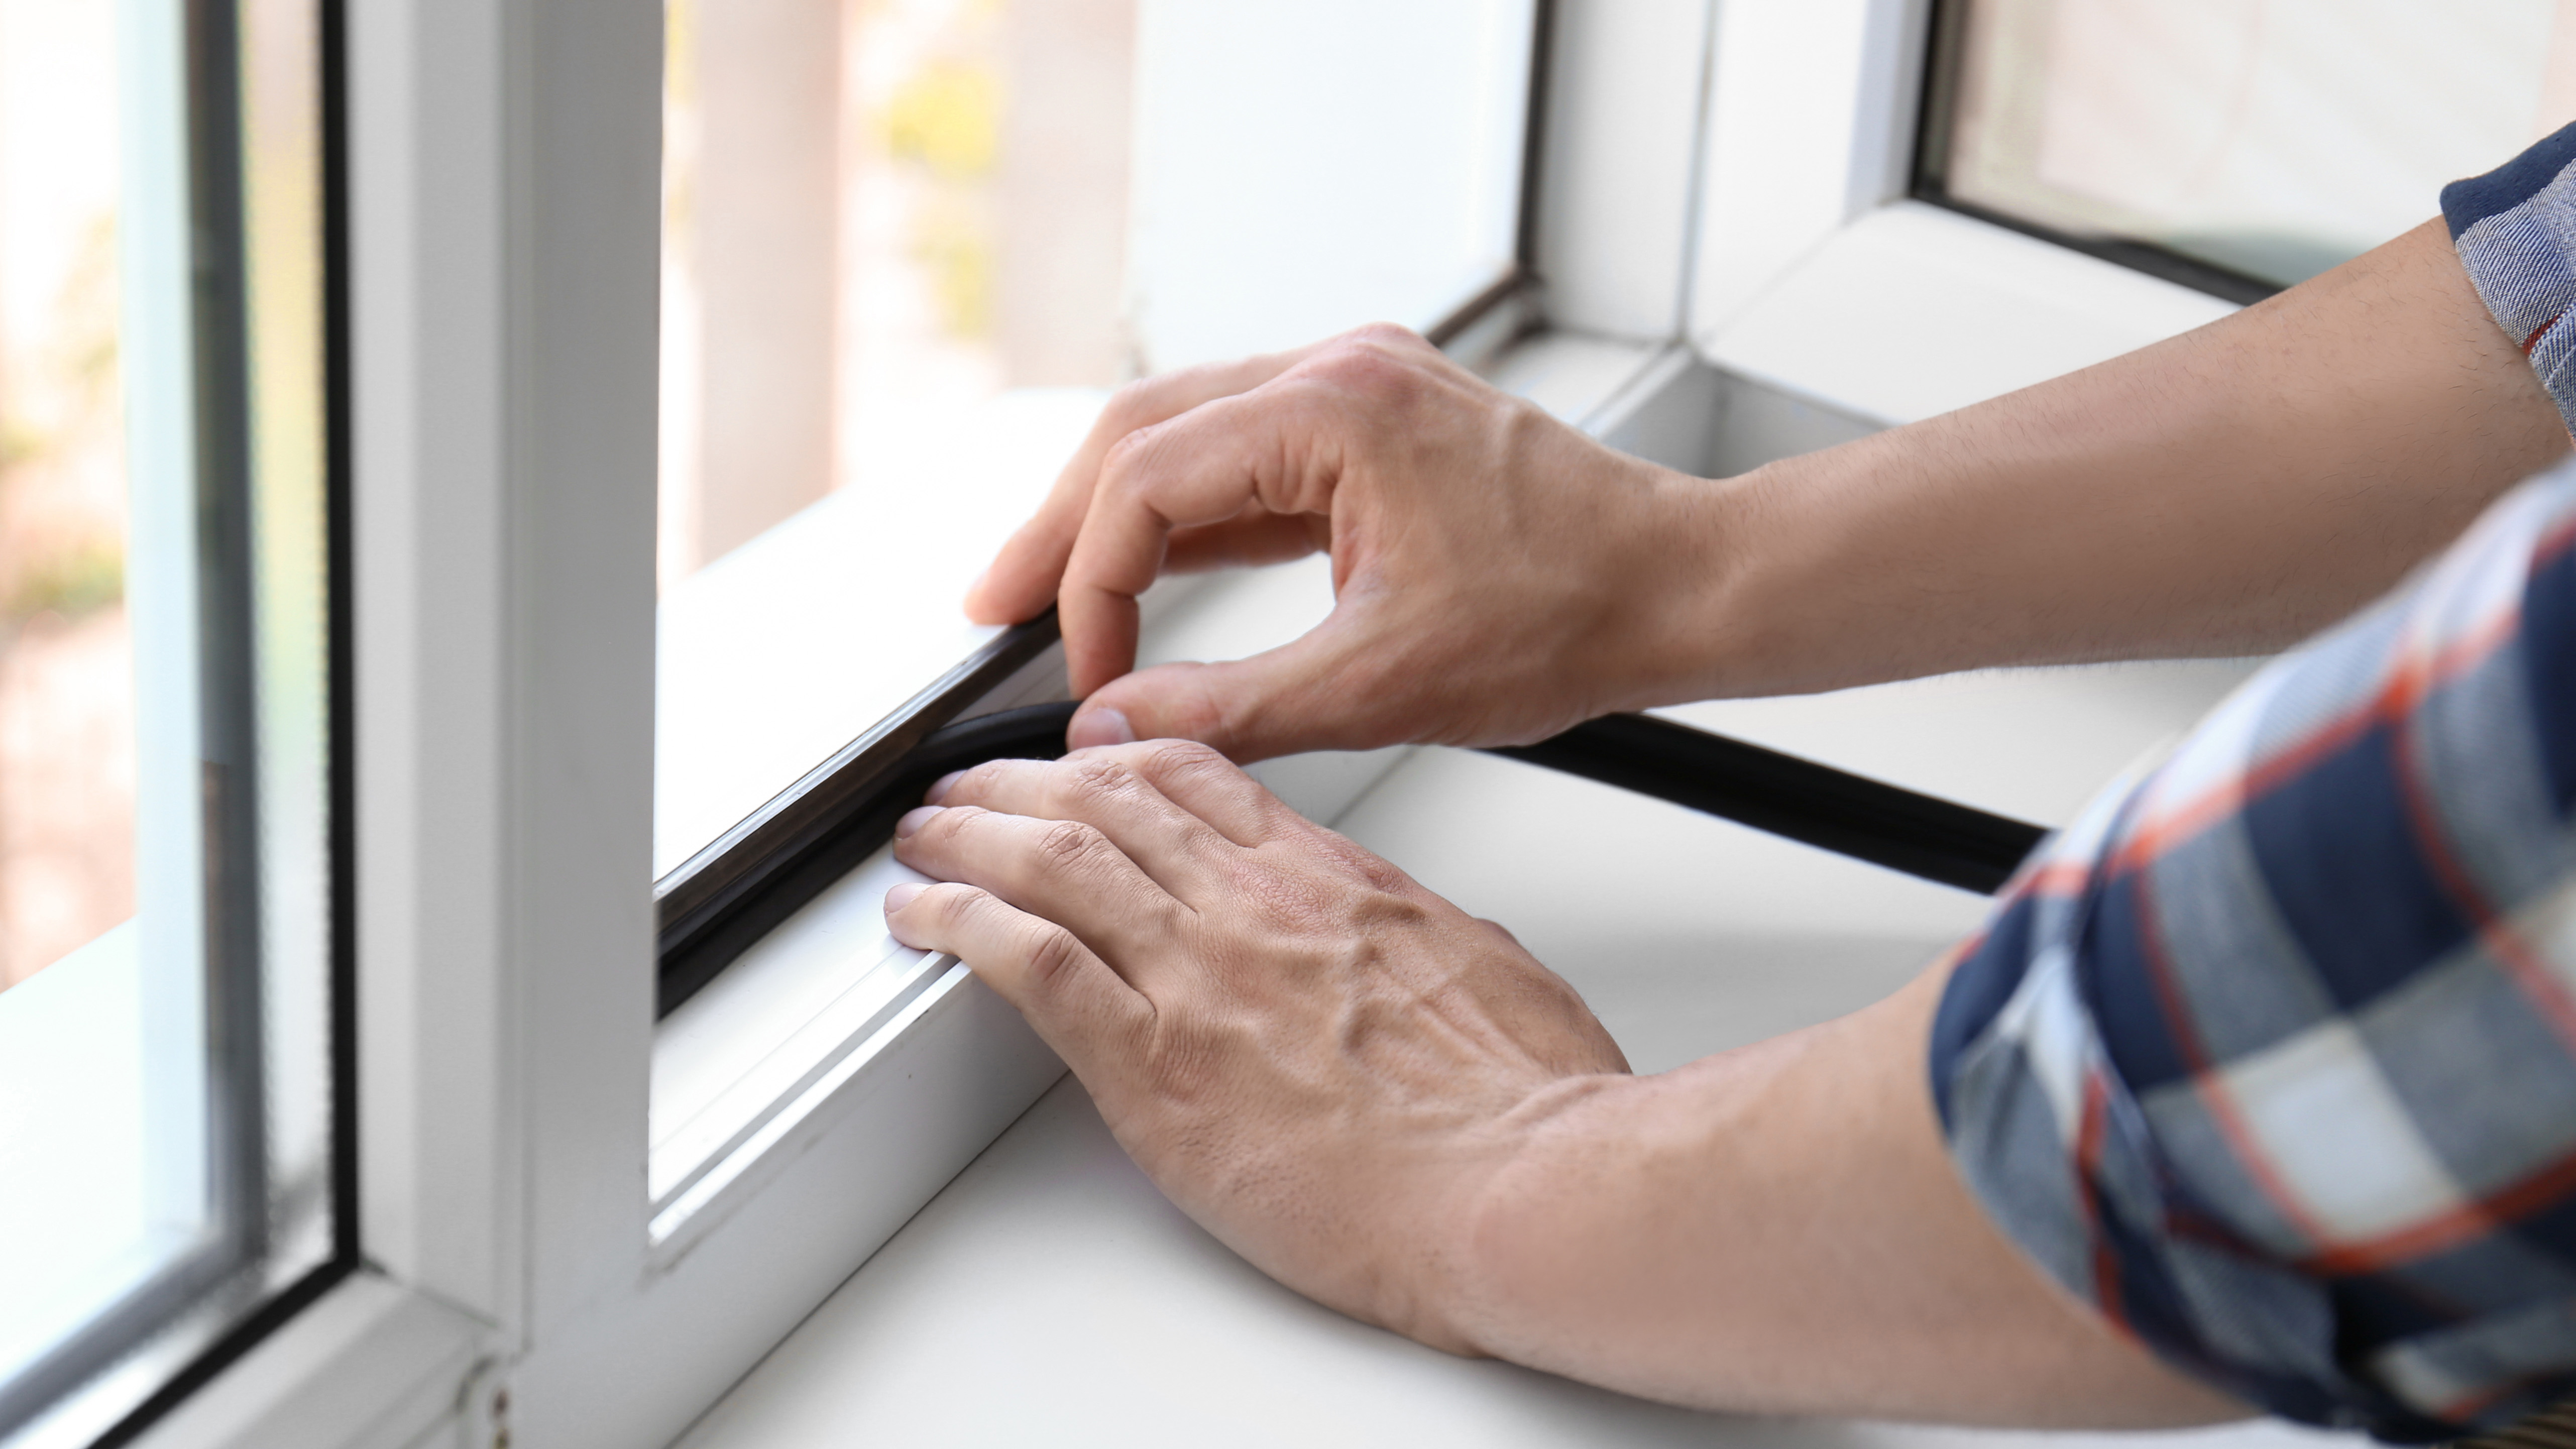 How To Seal A Window How to insulate your windows for winter | Tom's Guide